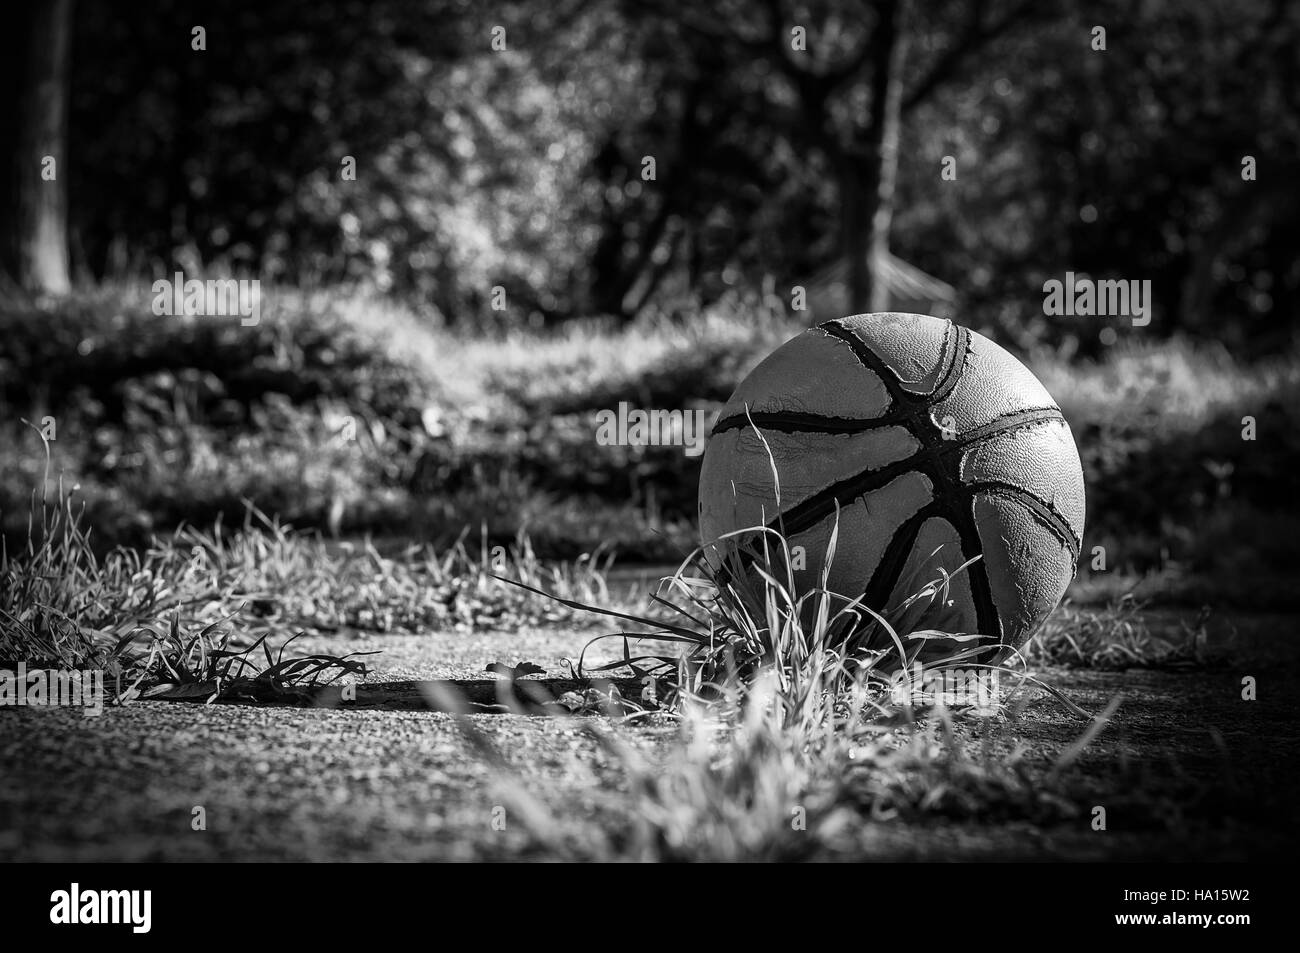 Basketball Black and White Stock Photos & Images - Alamy